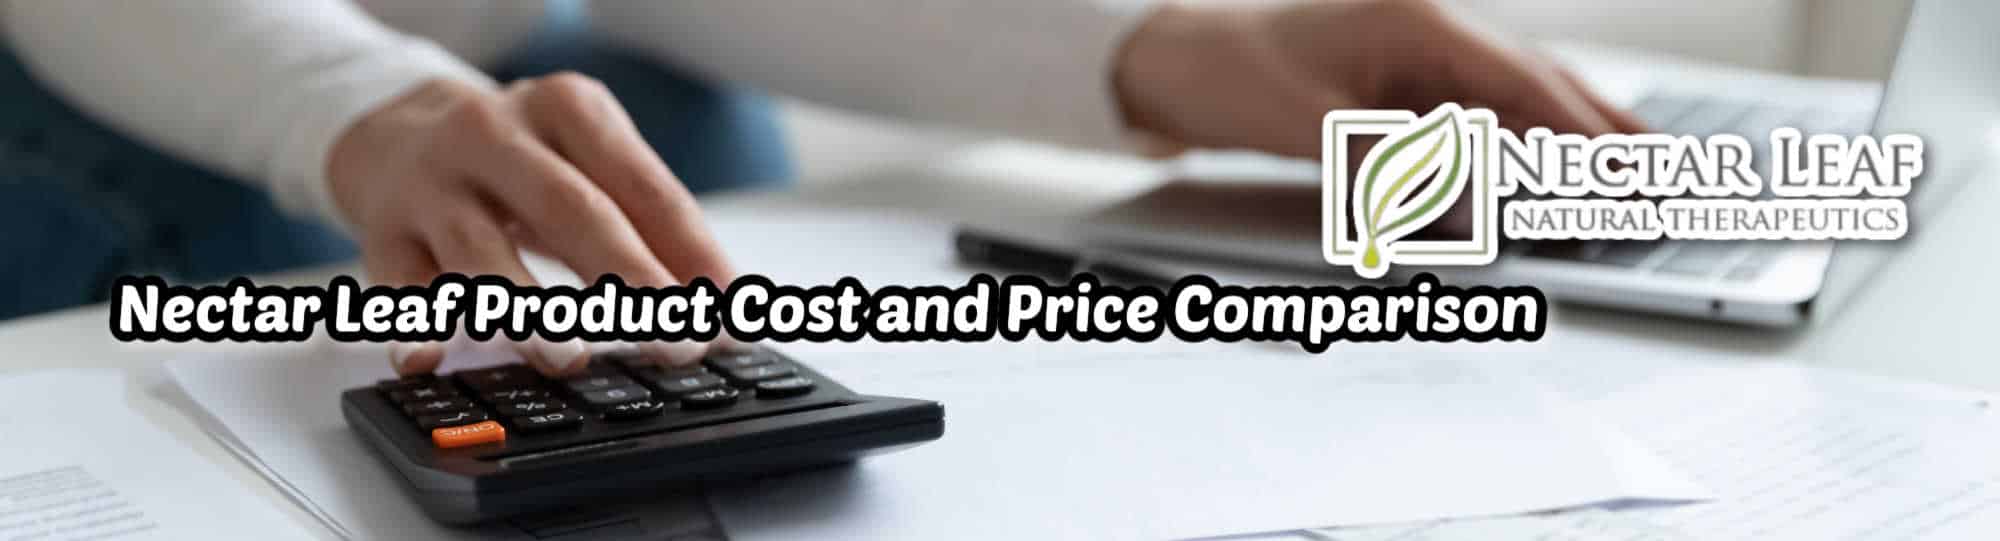 image of nectar leaf product cost and price comparison